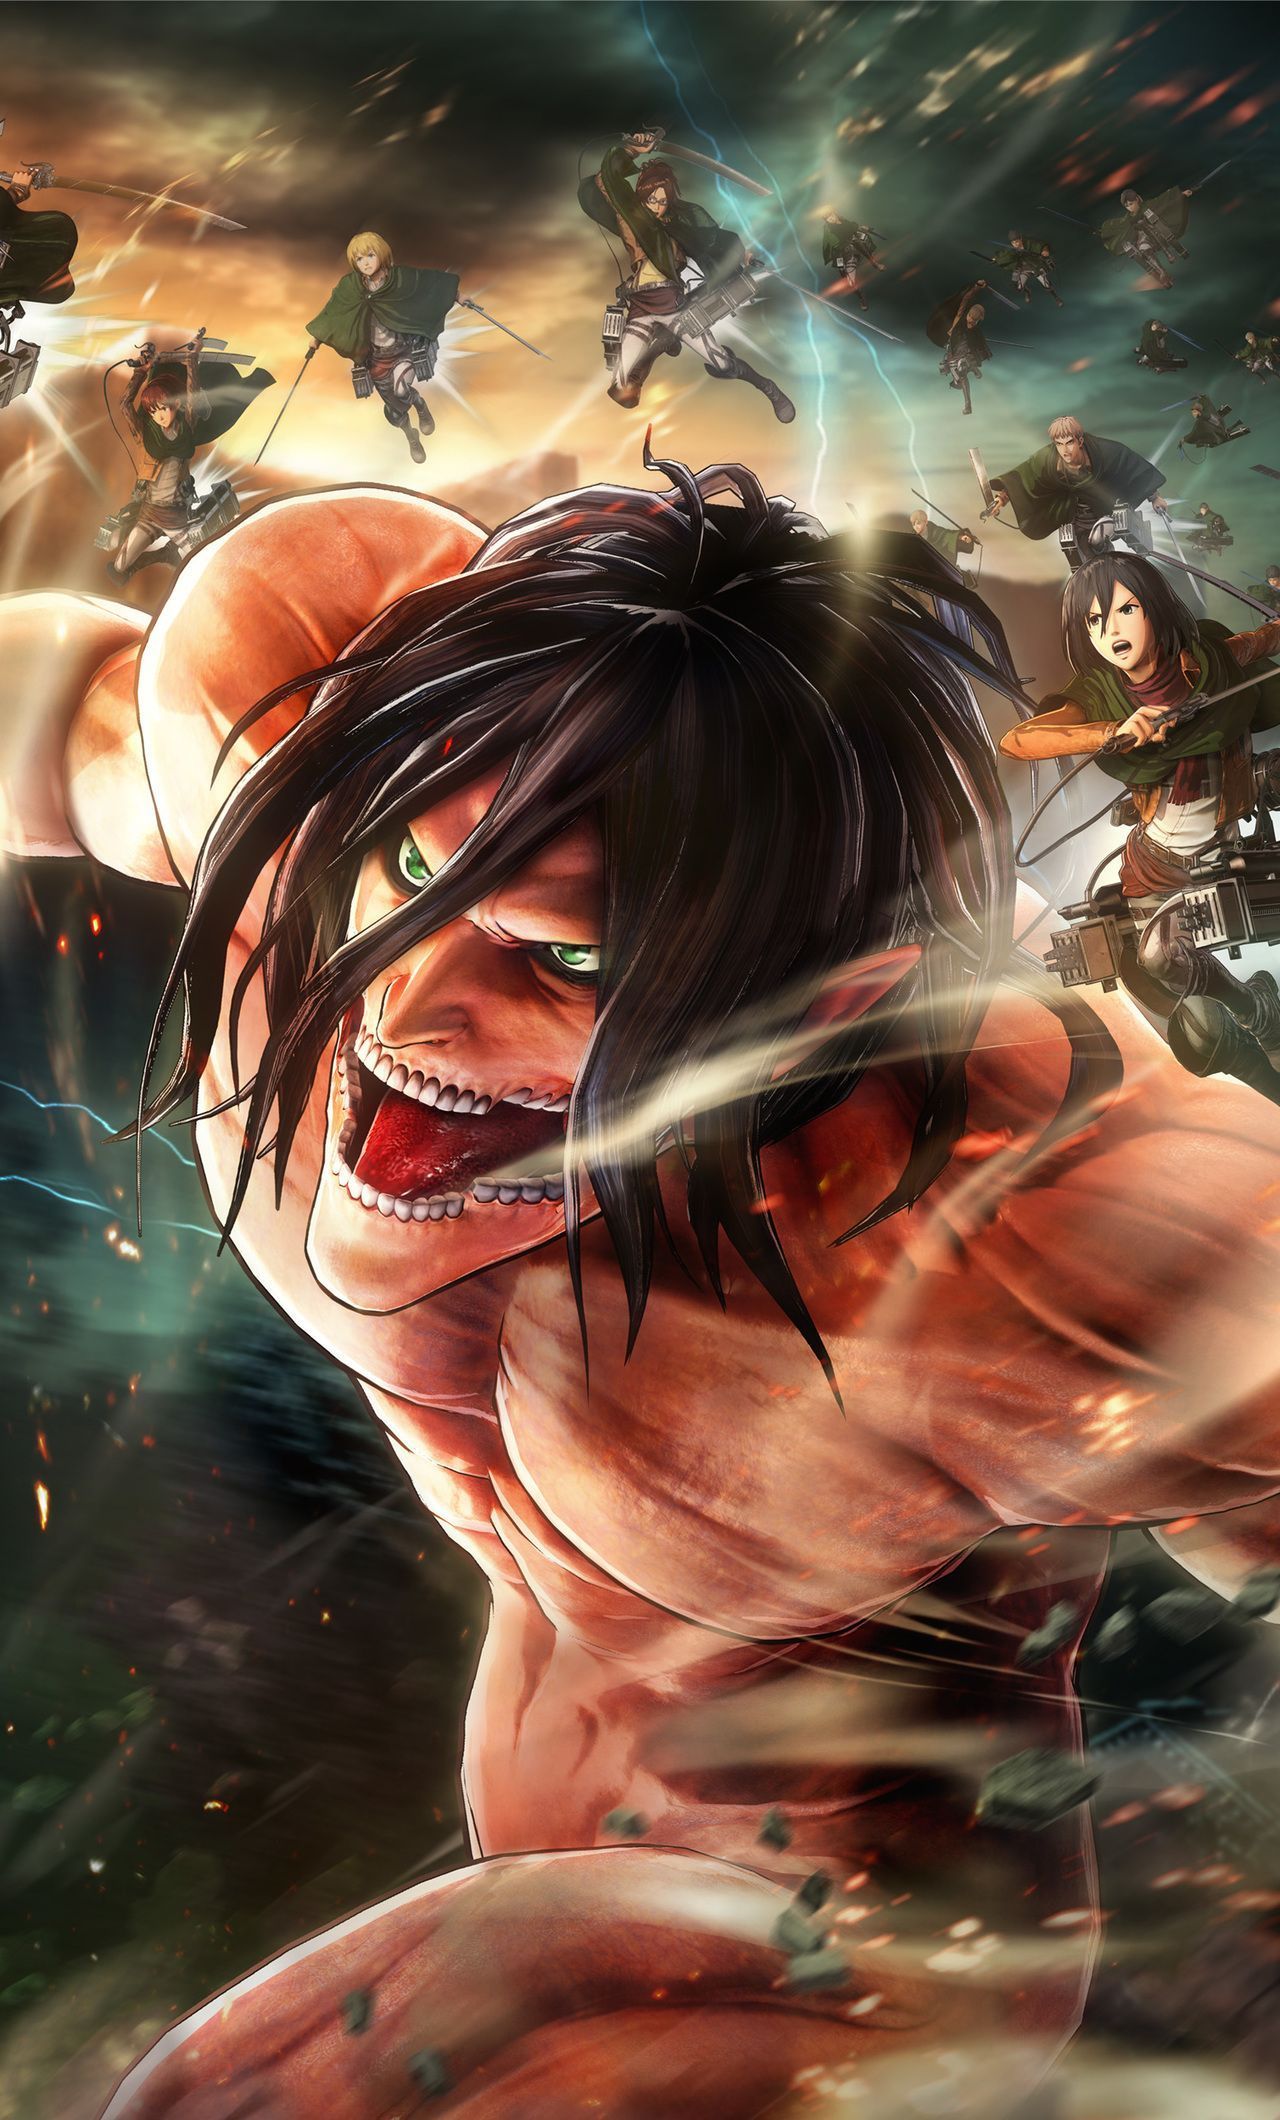 Attack On Titan Wallpaper iPhone Xr. Anime Wallpaper. Attack on titan art, Attack on titan fanart, Attack on titan anime